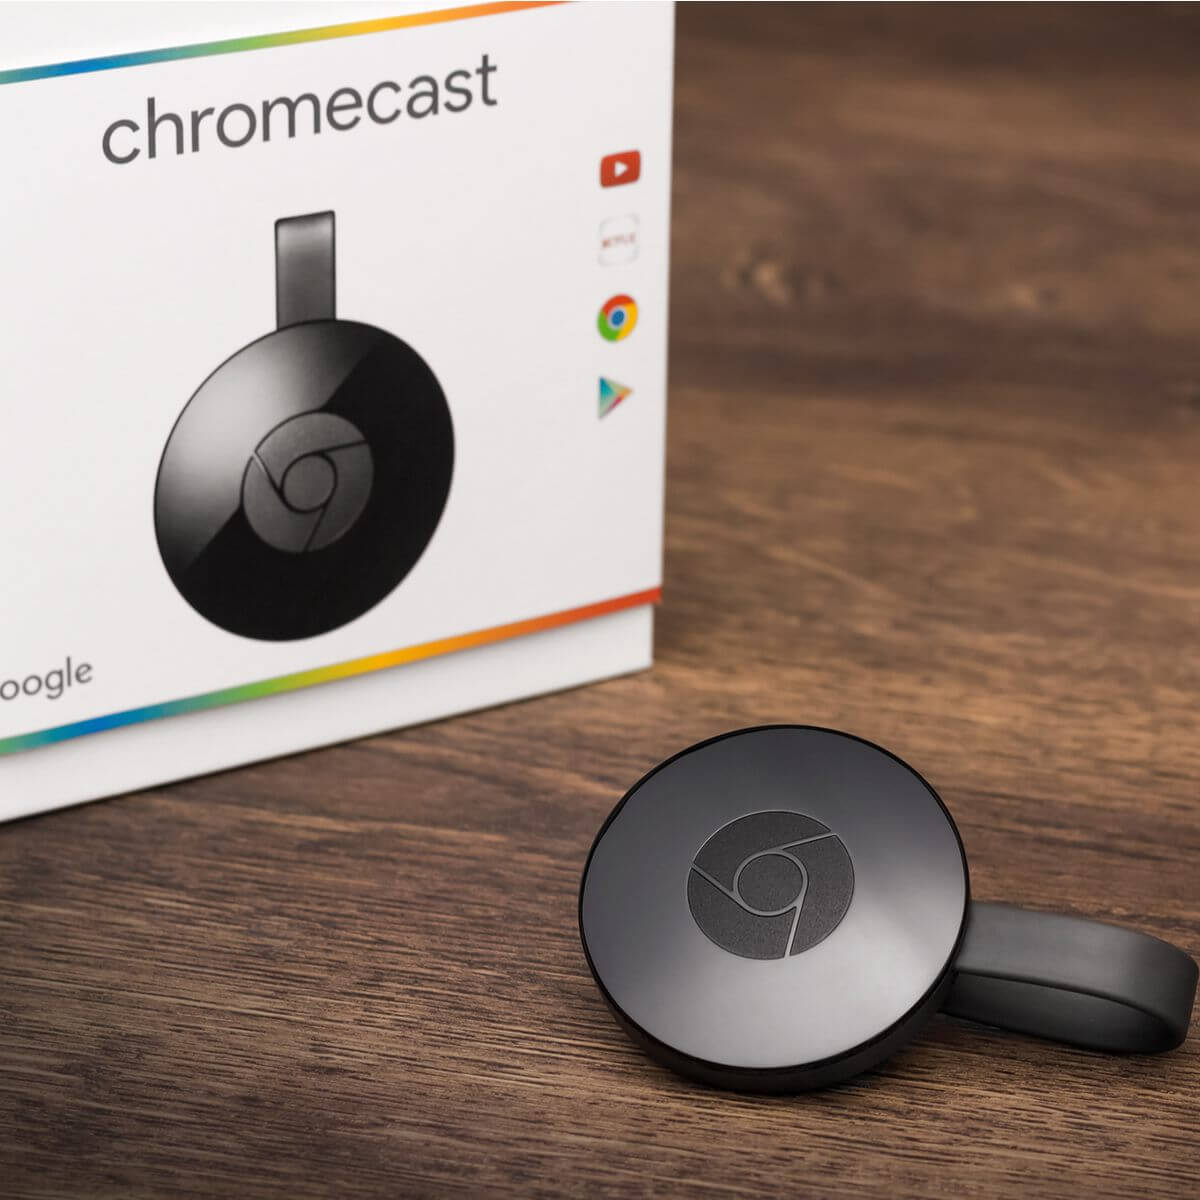 macbook not connecting to chromecast